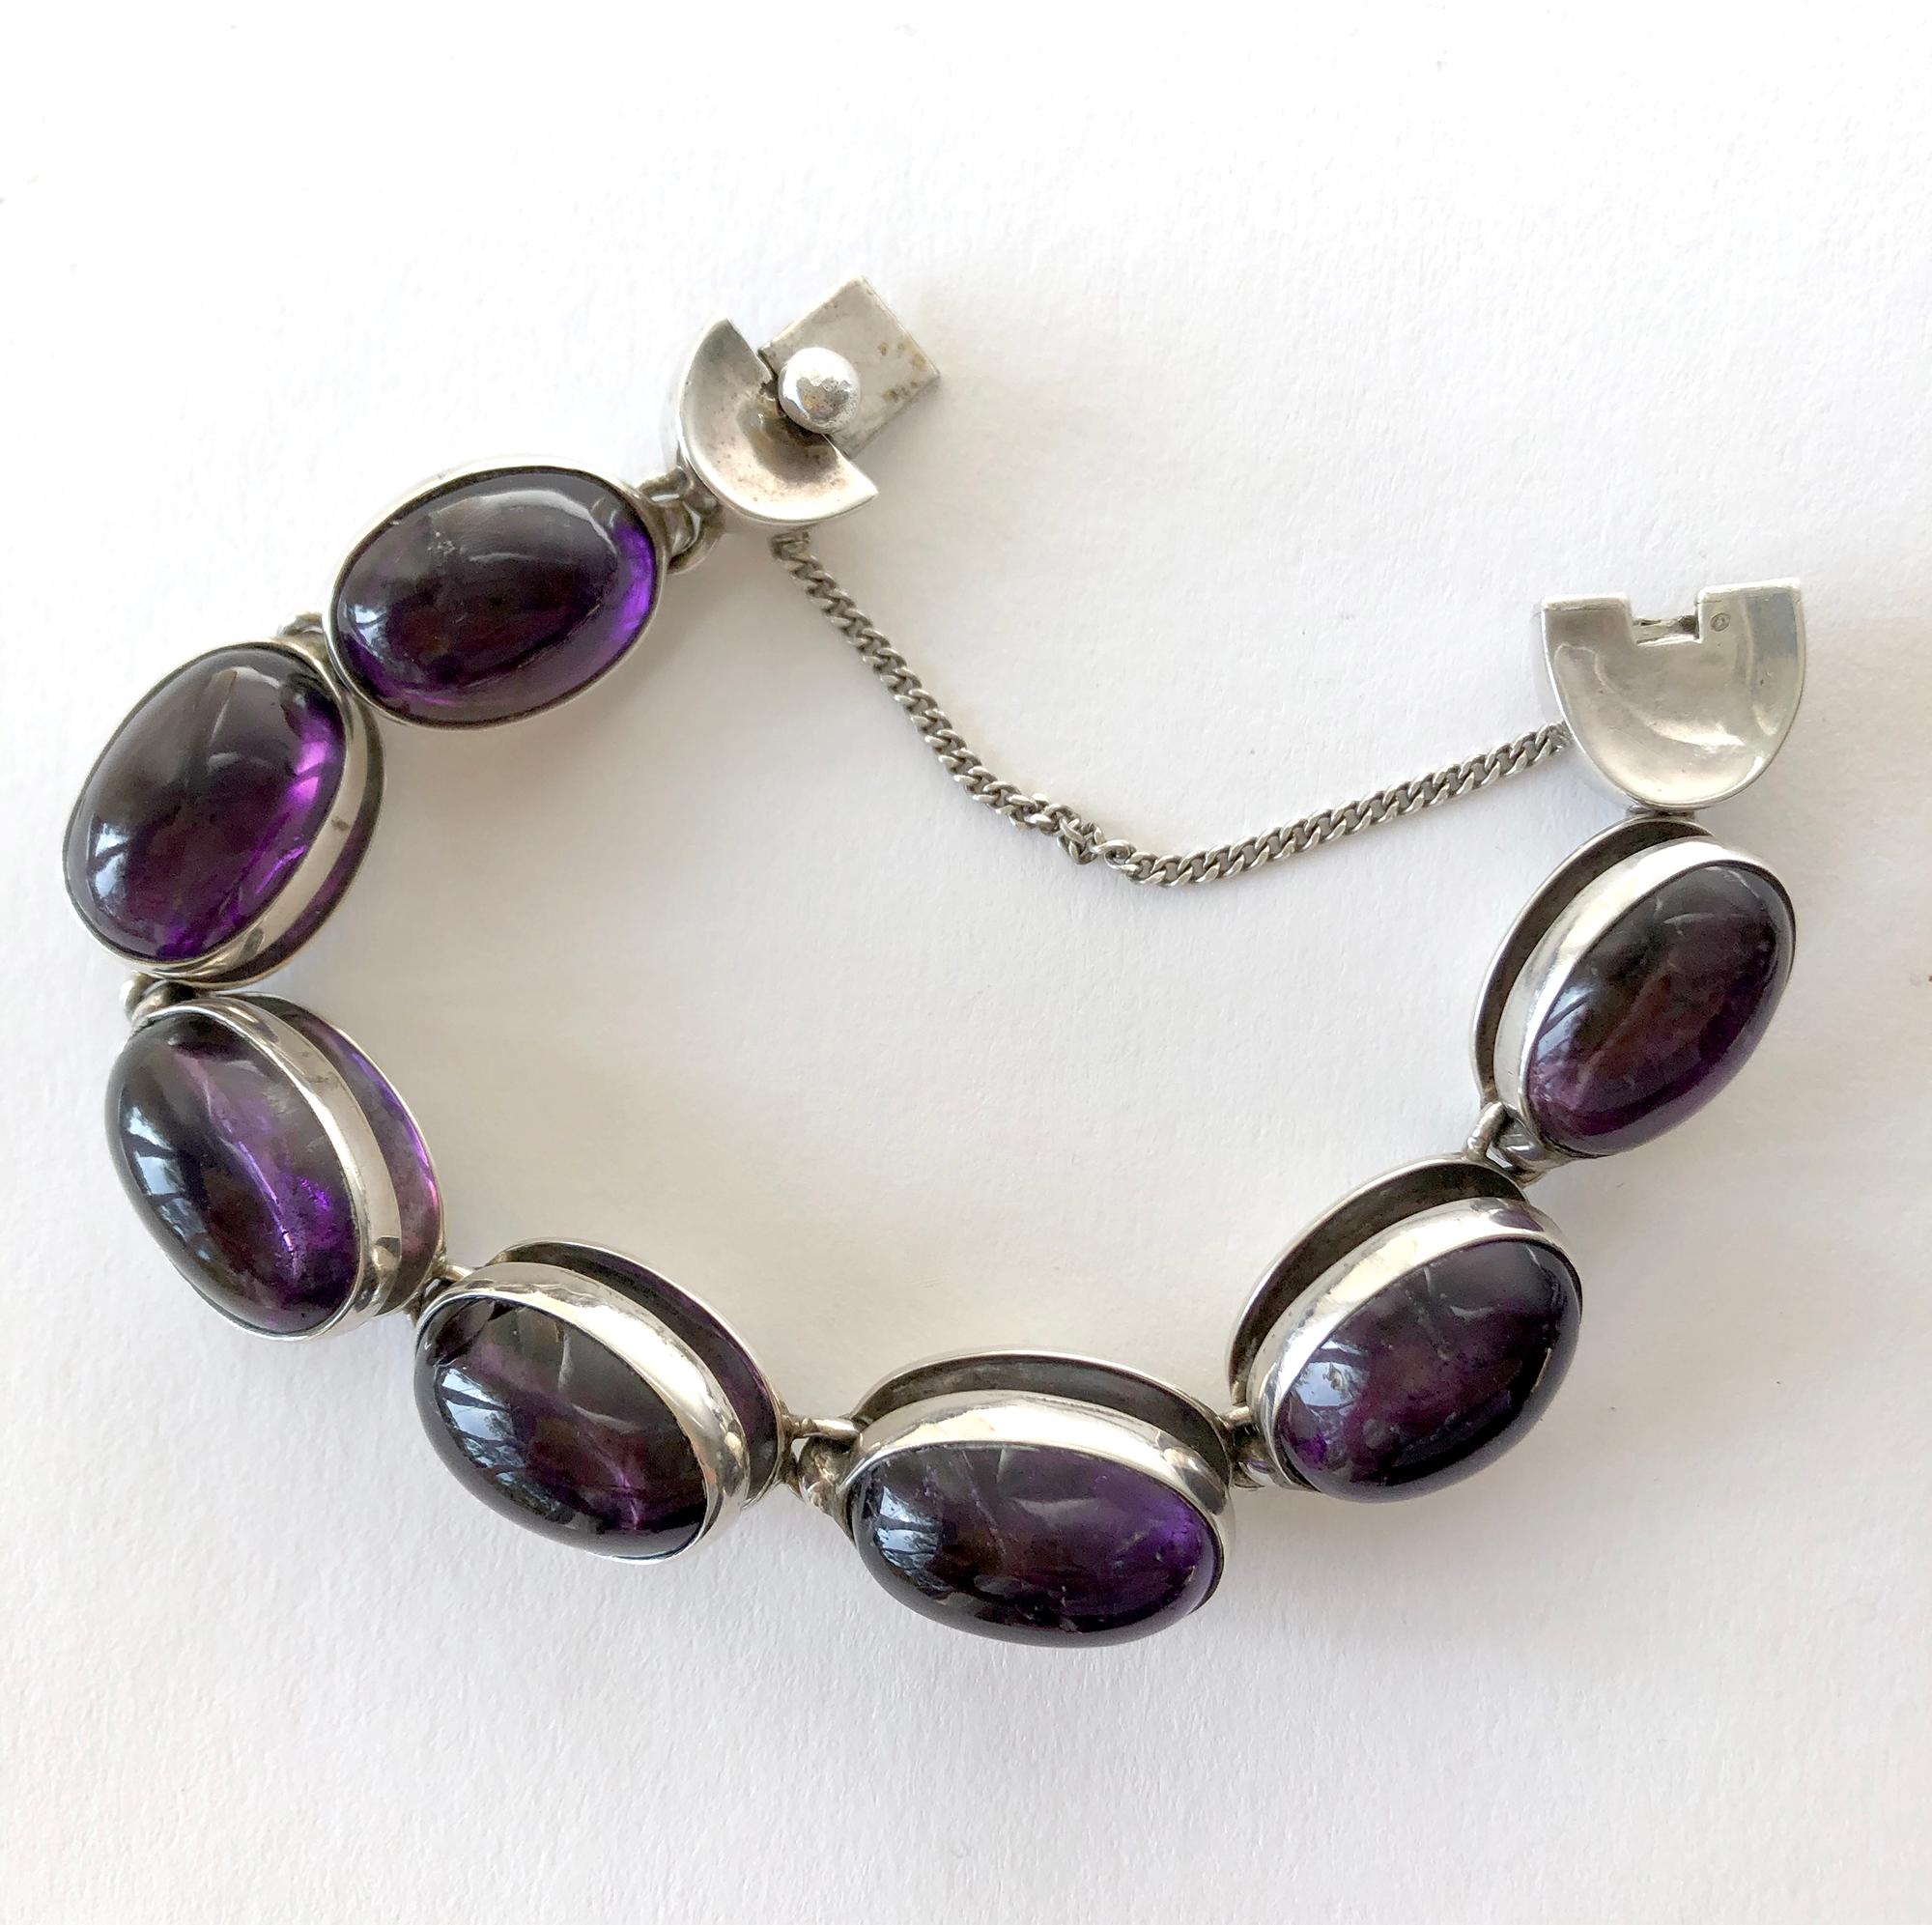 Rare to find jewelry suite of amethyst cabochons within sterling silver link necklace, bracelet and earrings all created by Antonio Pineda of Taxco, Mexico circa 1950's.  Necklace measures 17